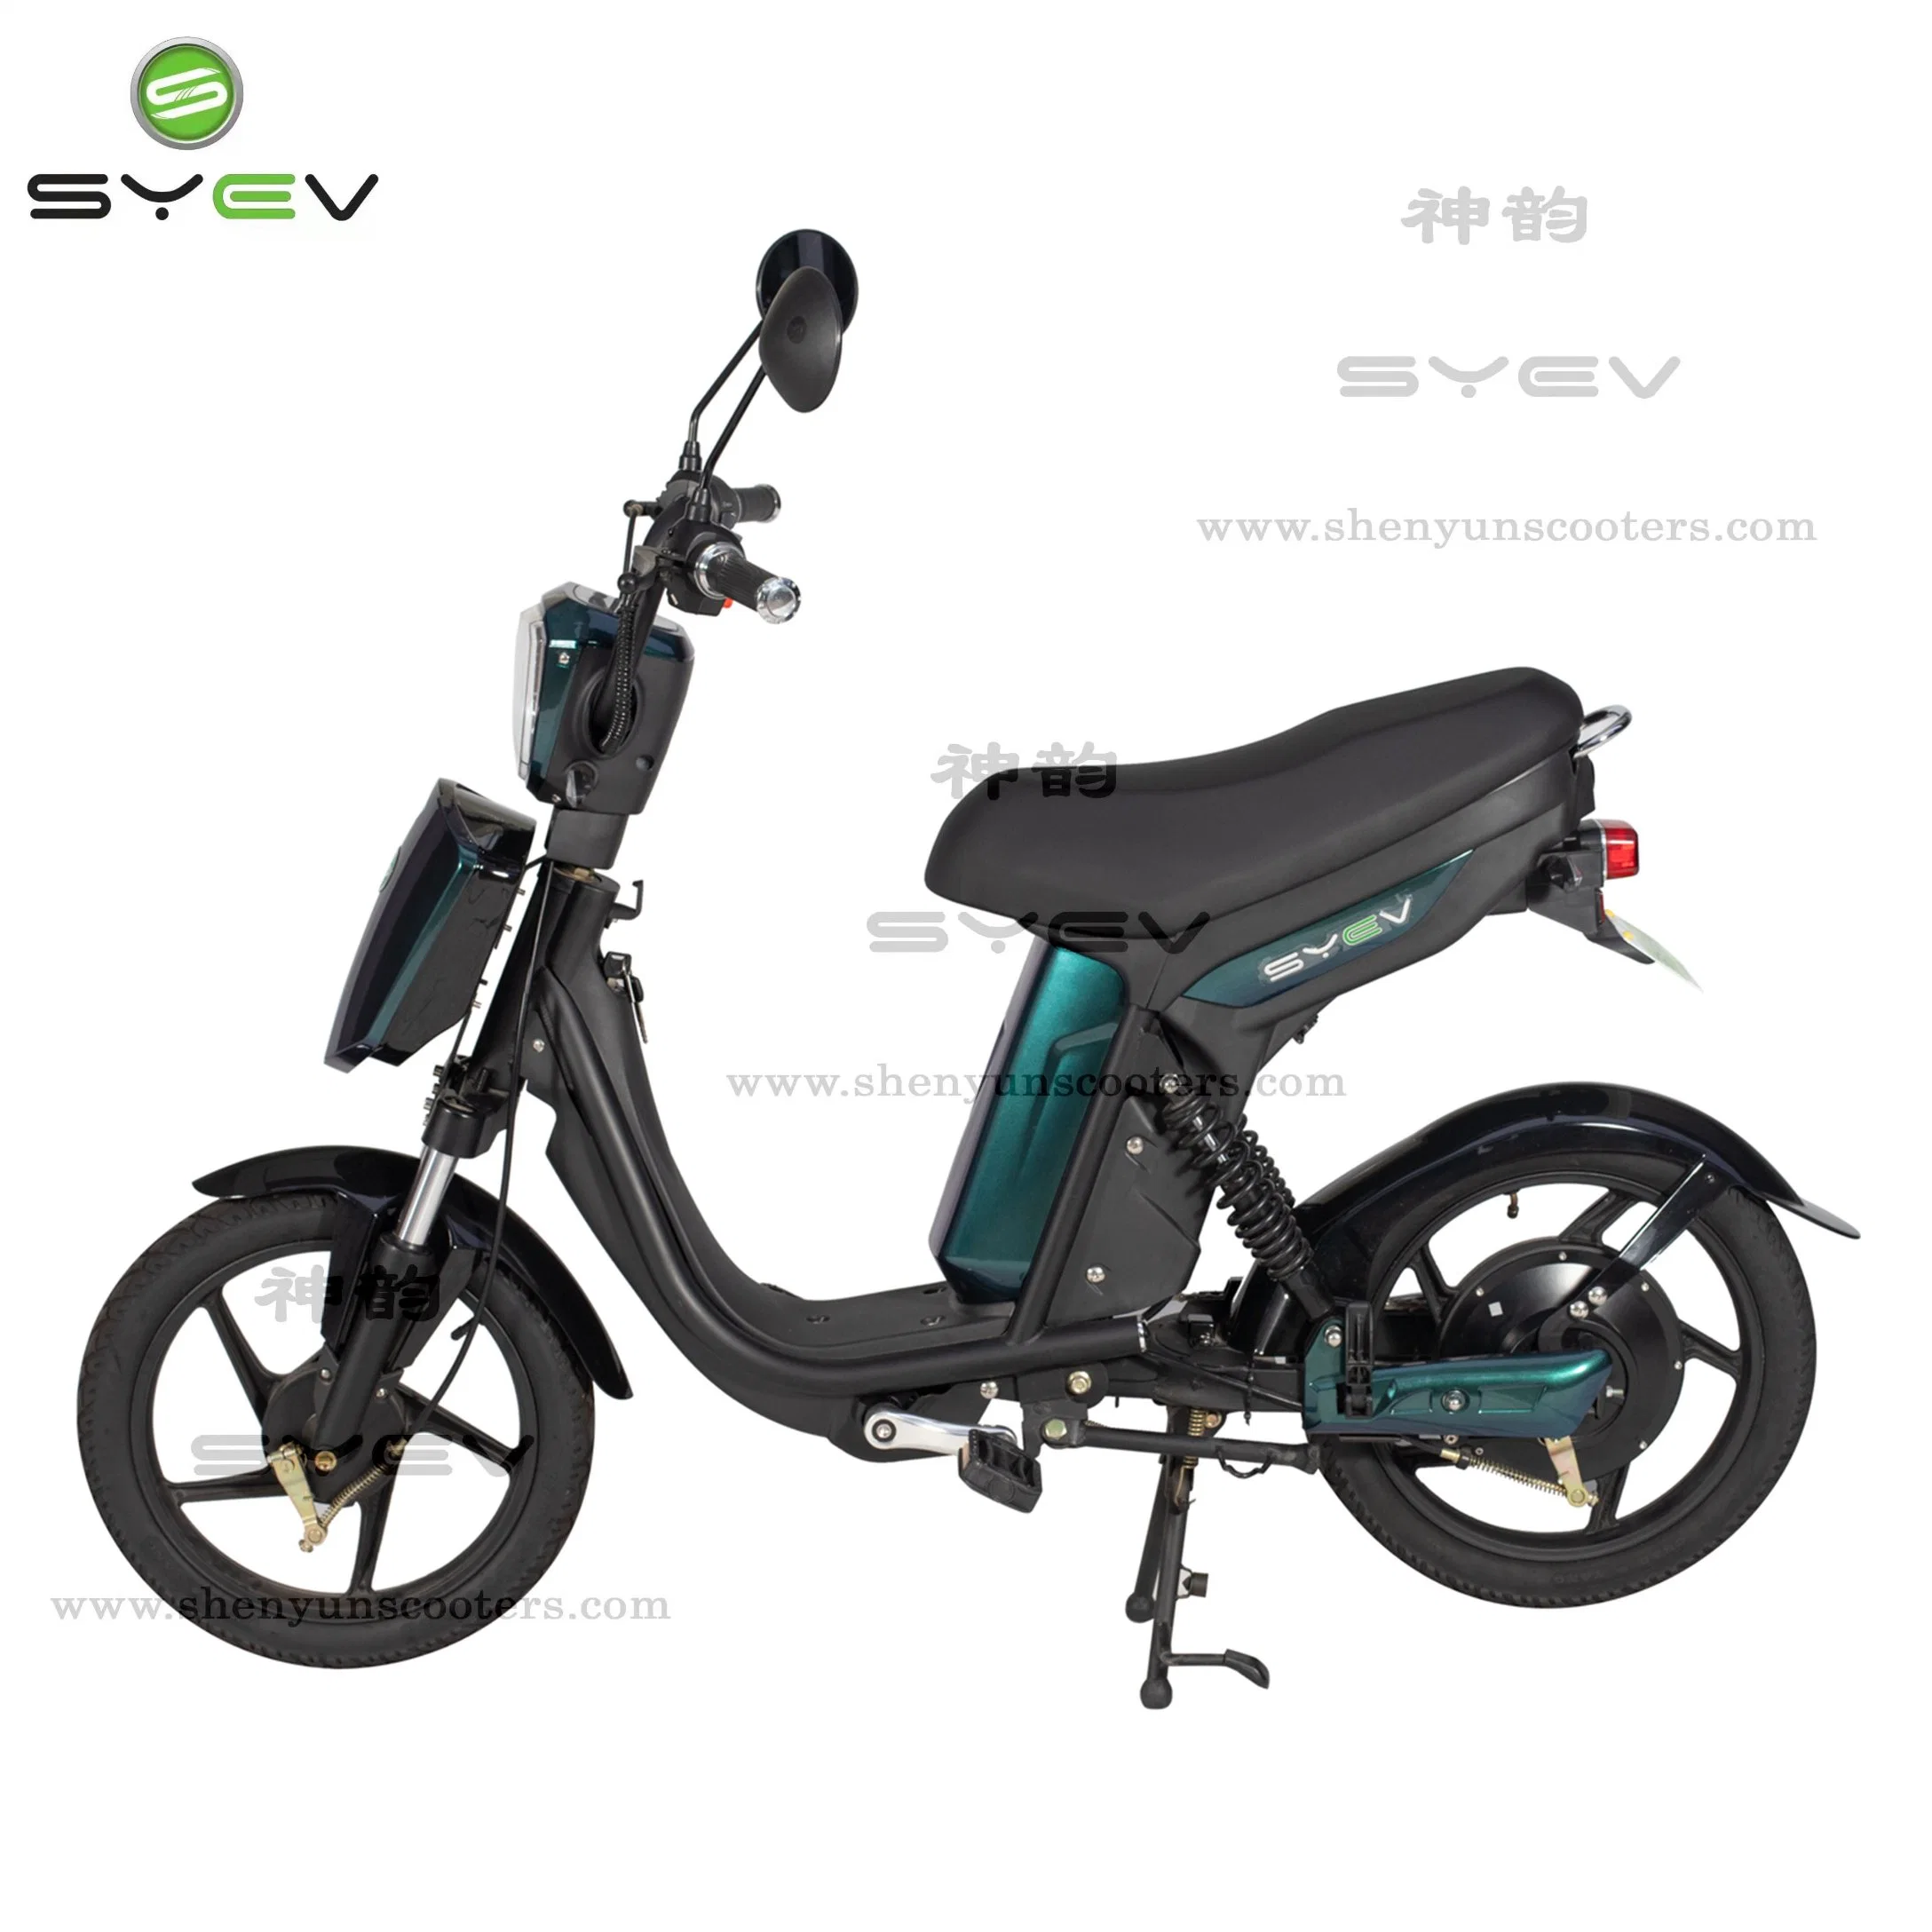 Syev China CKD Moped Long-Lasting Battery Life Electric Scooter 350W/500W Brushless Motor Electric Mopeds with Pedals for Adults Bike Motorcycle